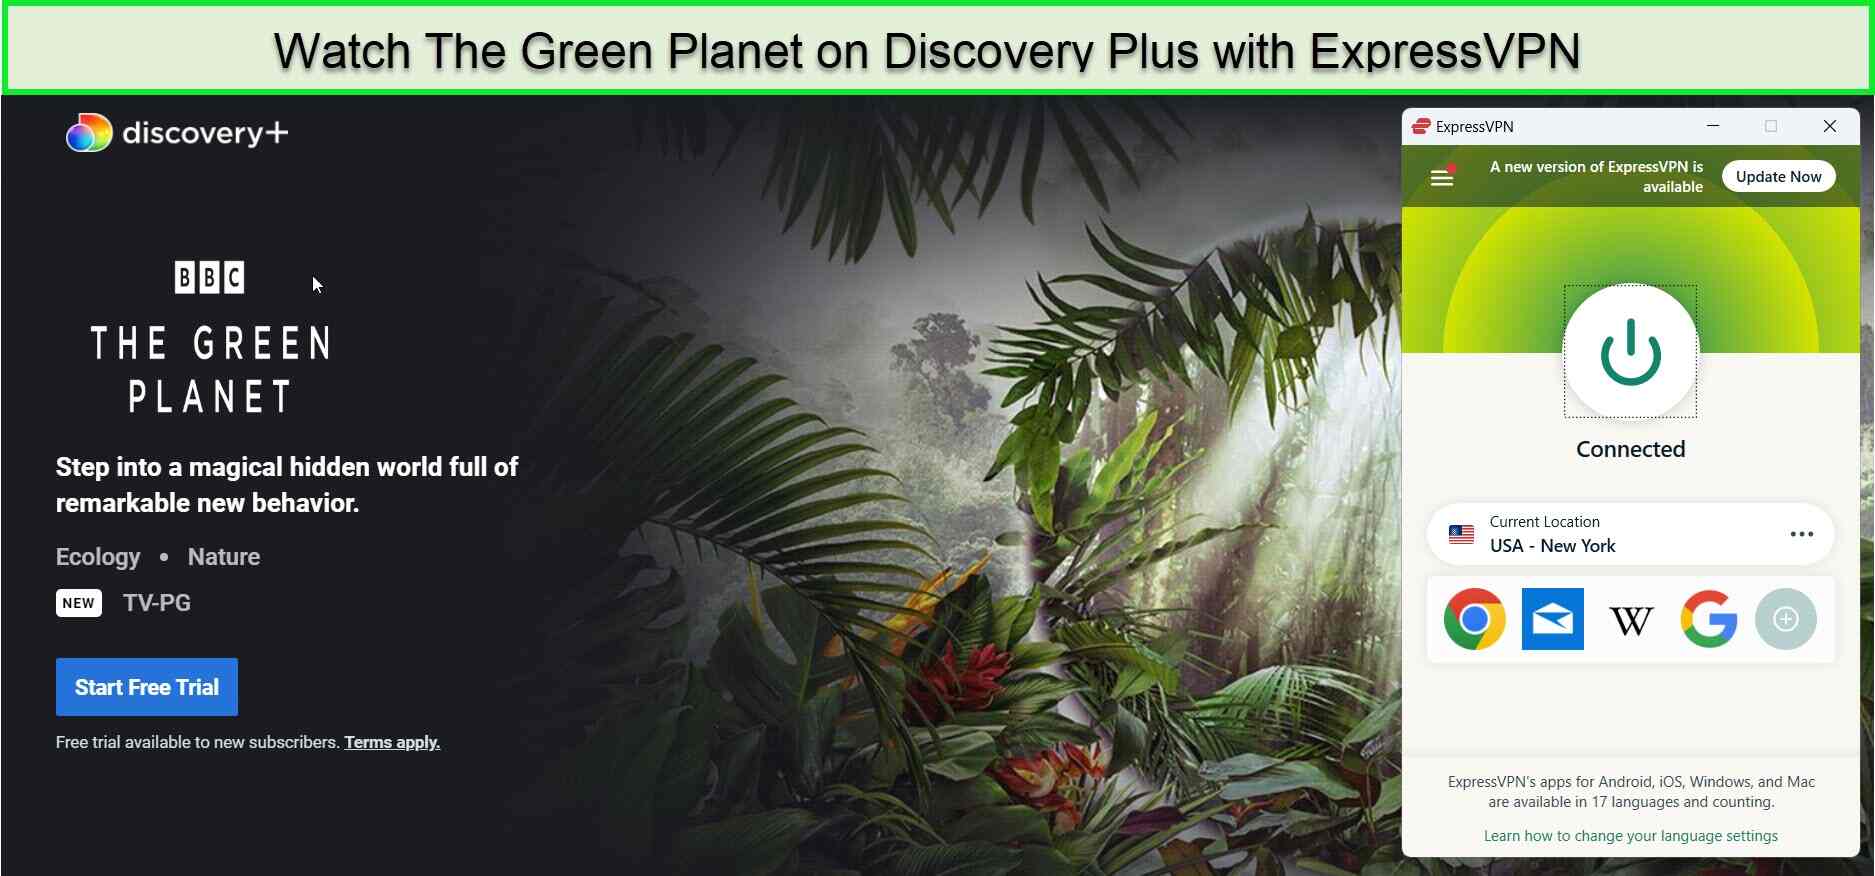 Watch-The-Green-Planet-in-UK-on-Discovery-Plus-with-ExpressVPN